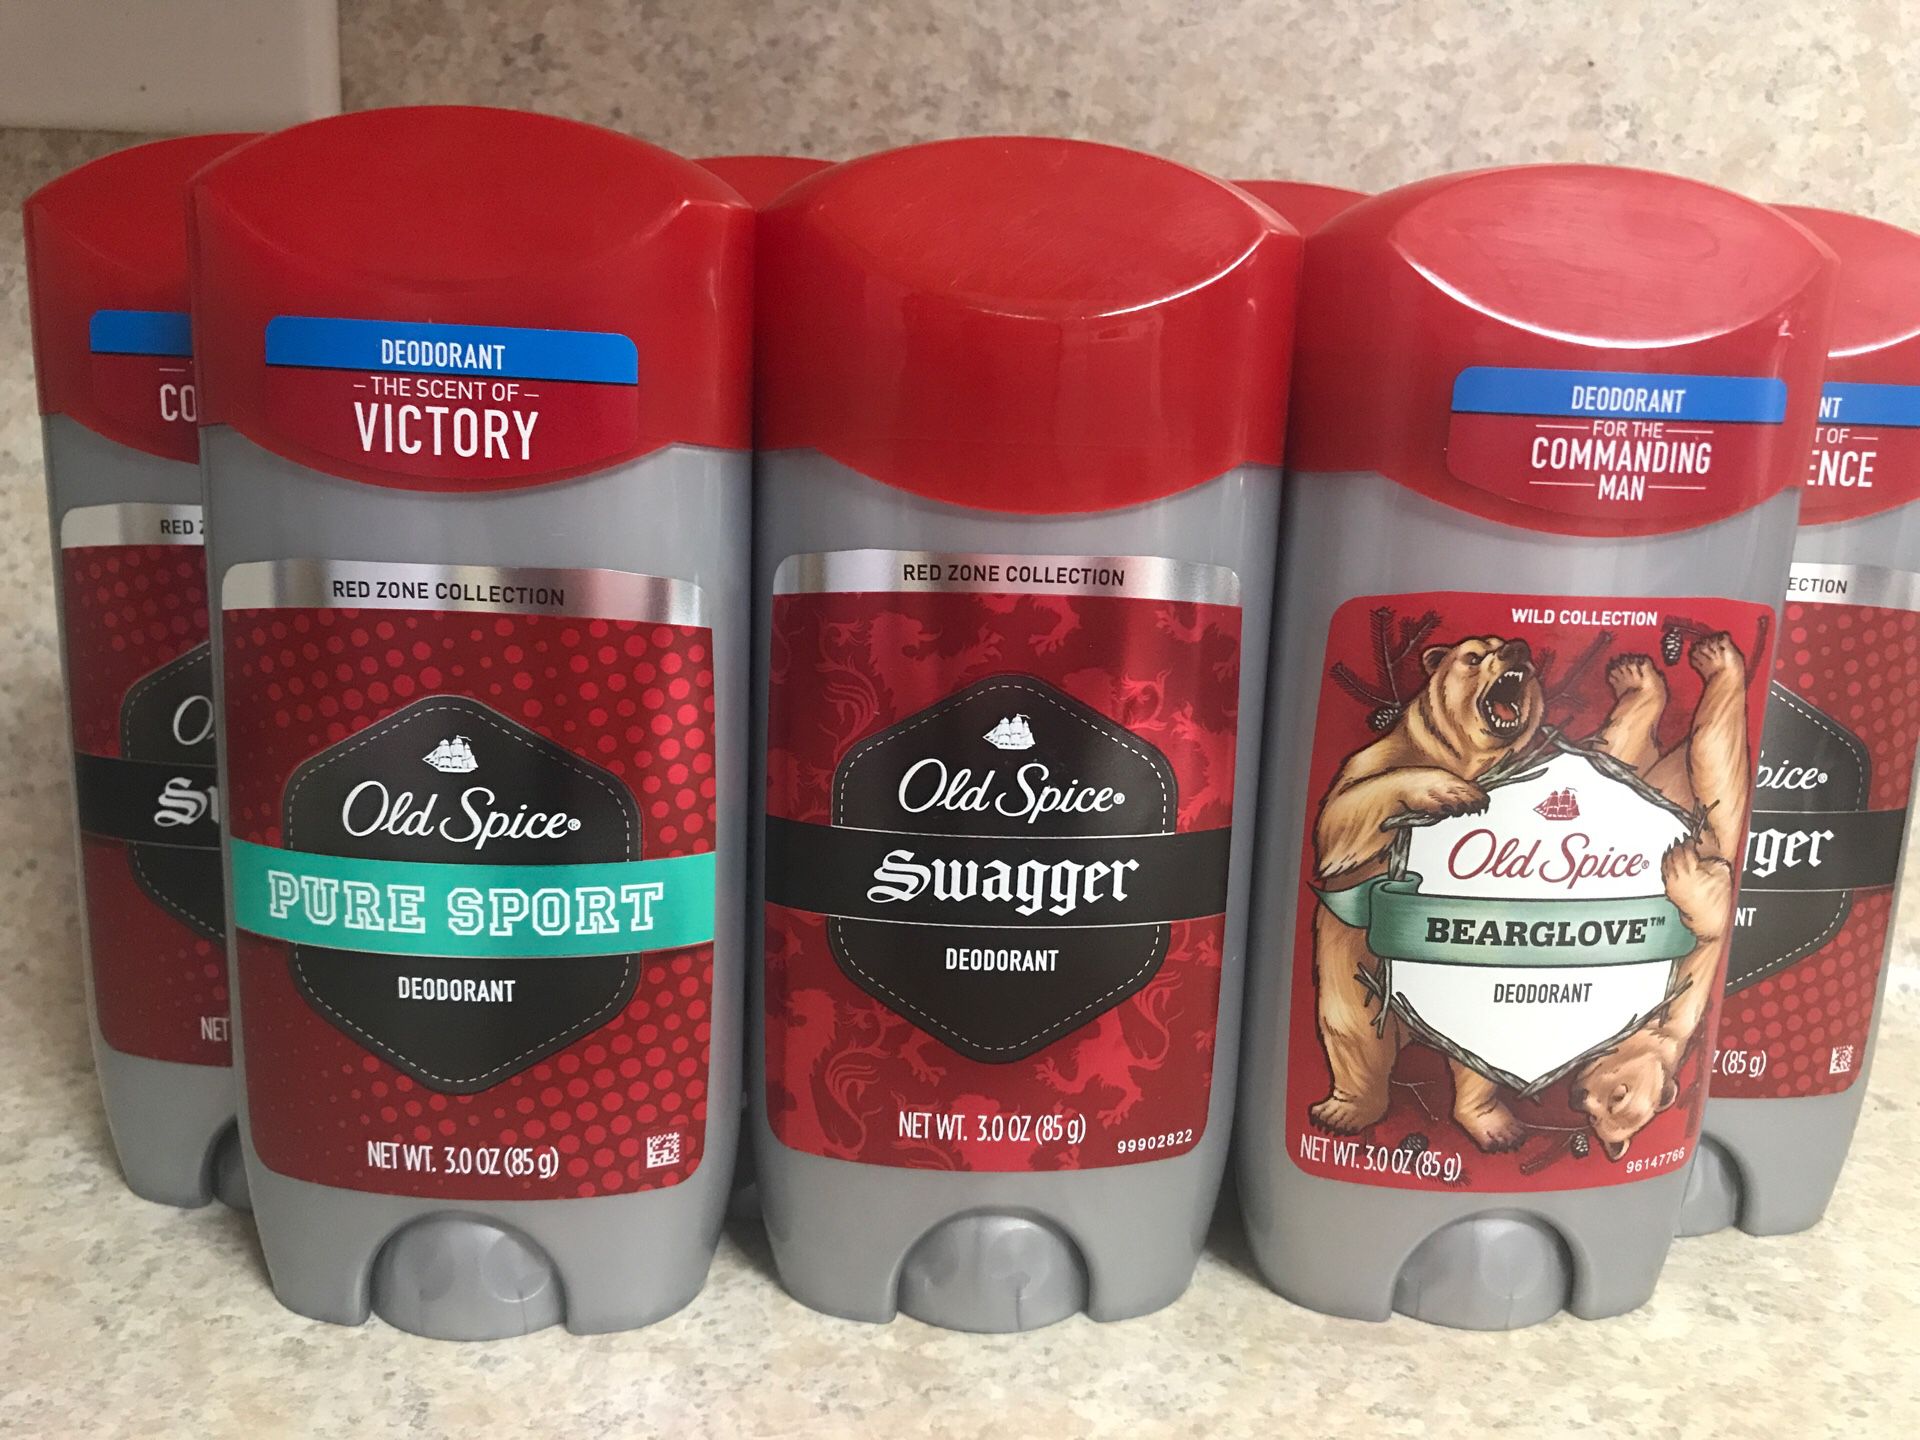 Old Spice deodorant for $2.5 each